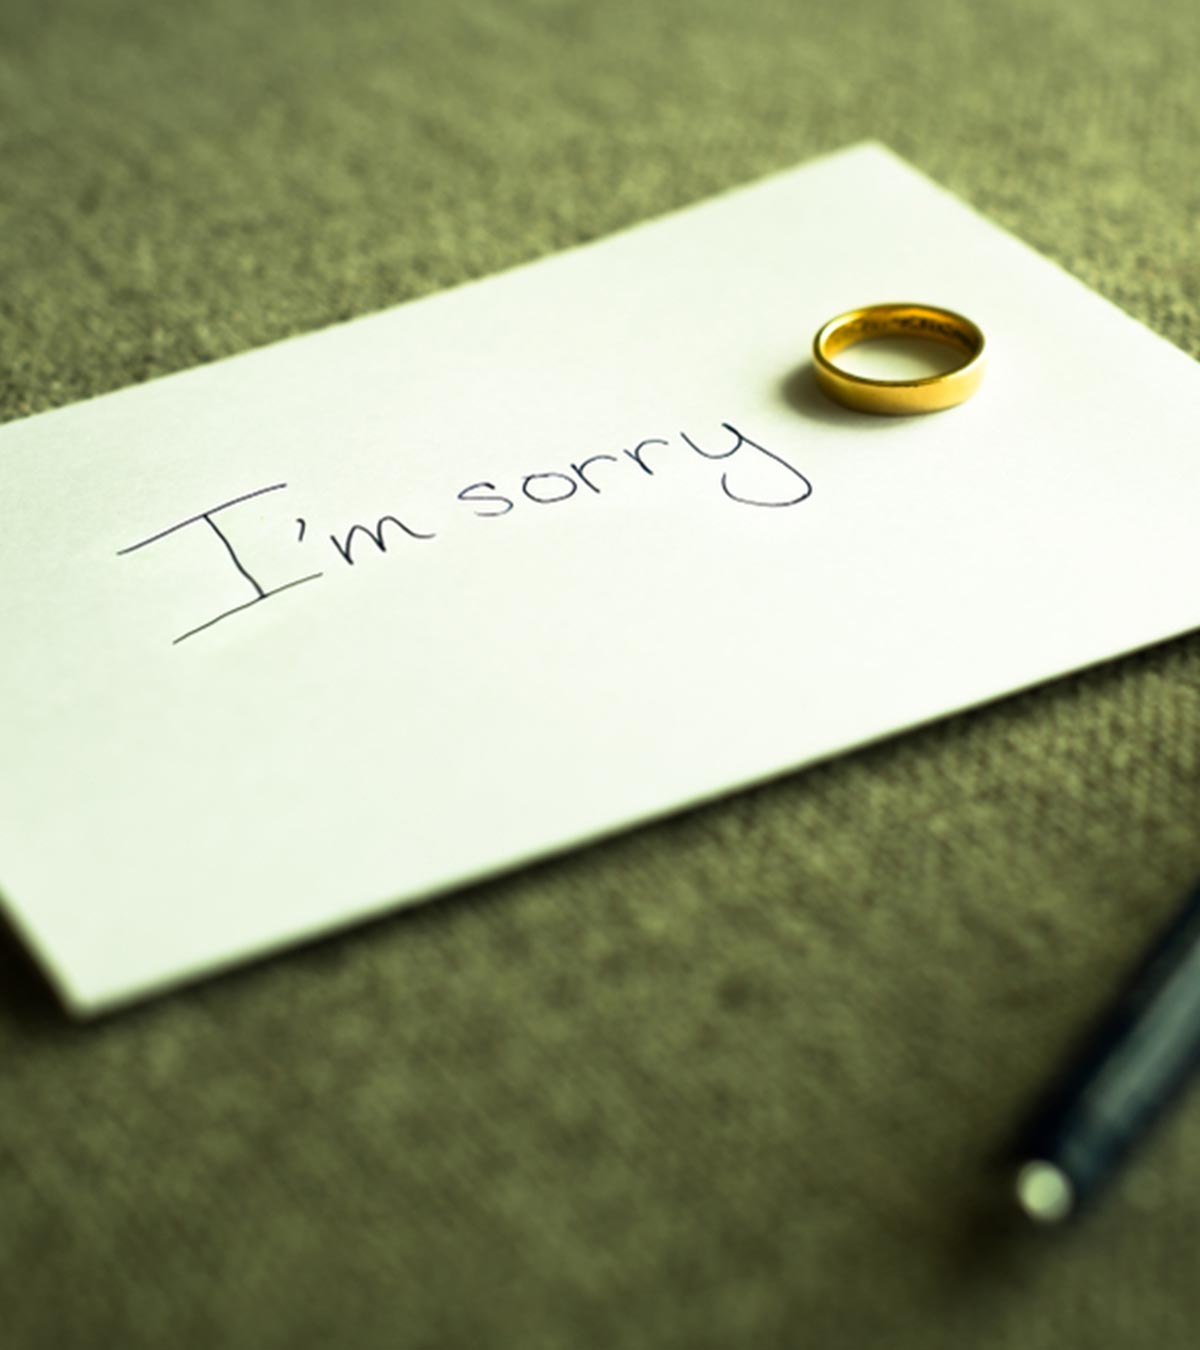 151 Sincere Sorry Messages And Quotes For Husband